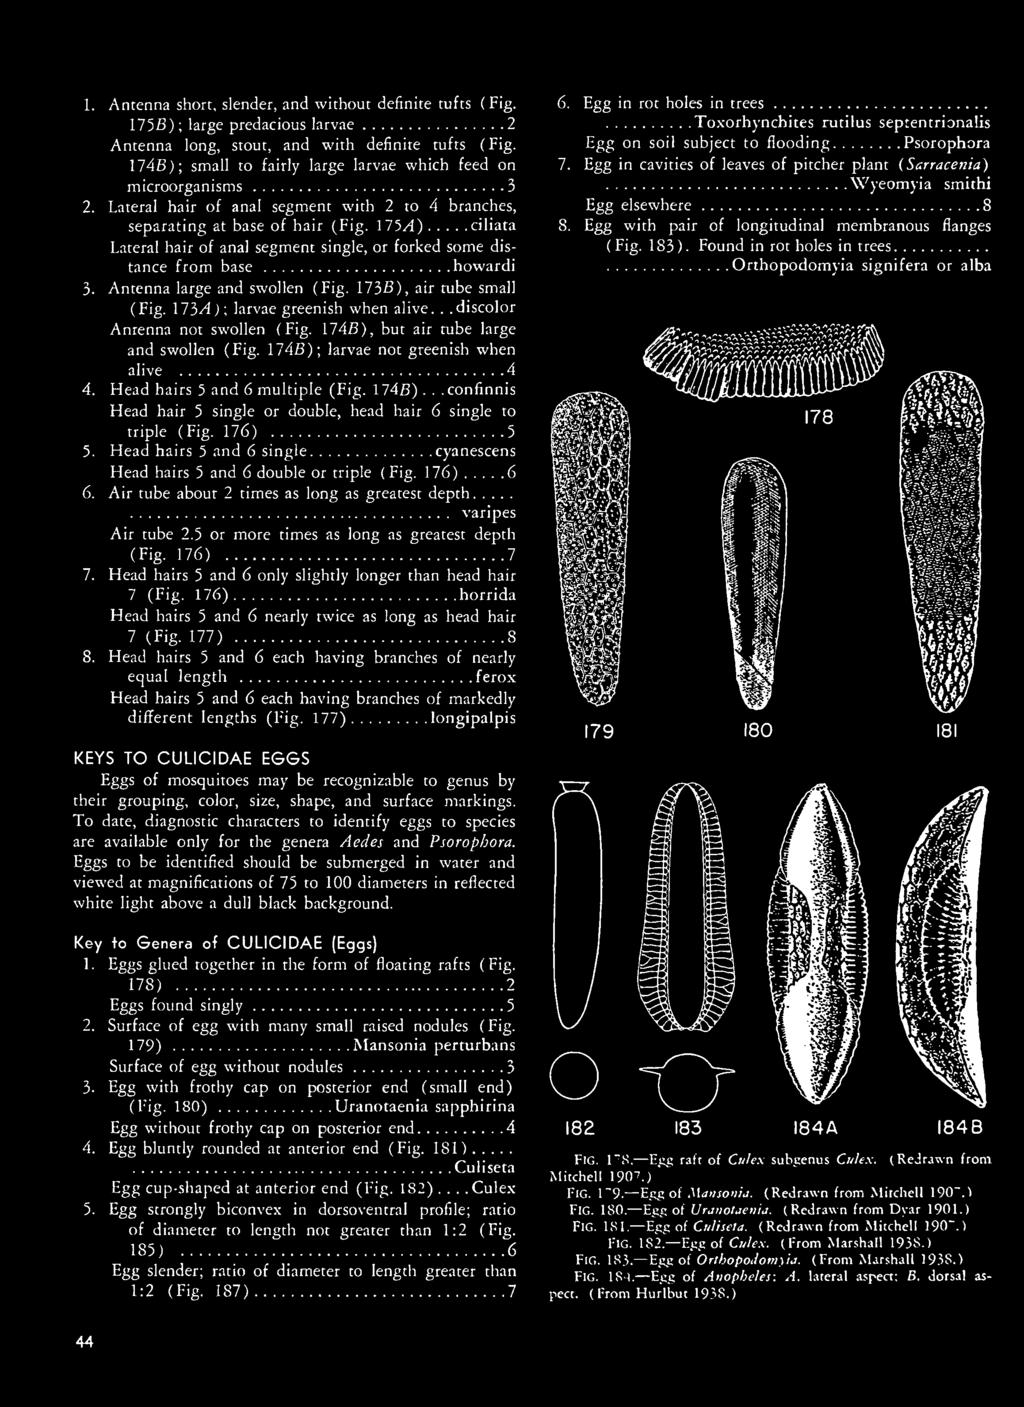 176) 5 5. Head hairs 5 and 6 single cyanescens Head hairs 5 and 6 double or triple (Fig. 176) 6 6. Air tube about 2 times as long as greatest depth varipes Air tube 2.